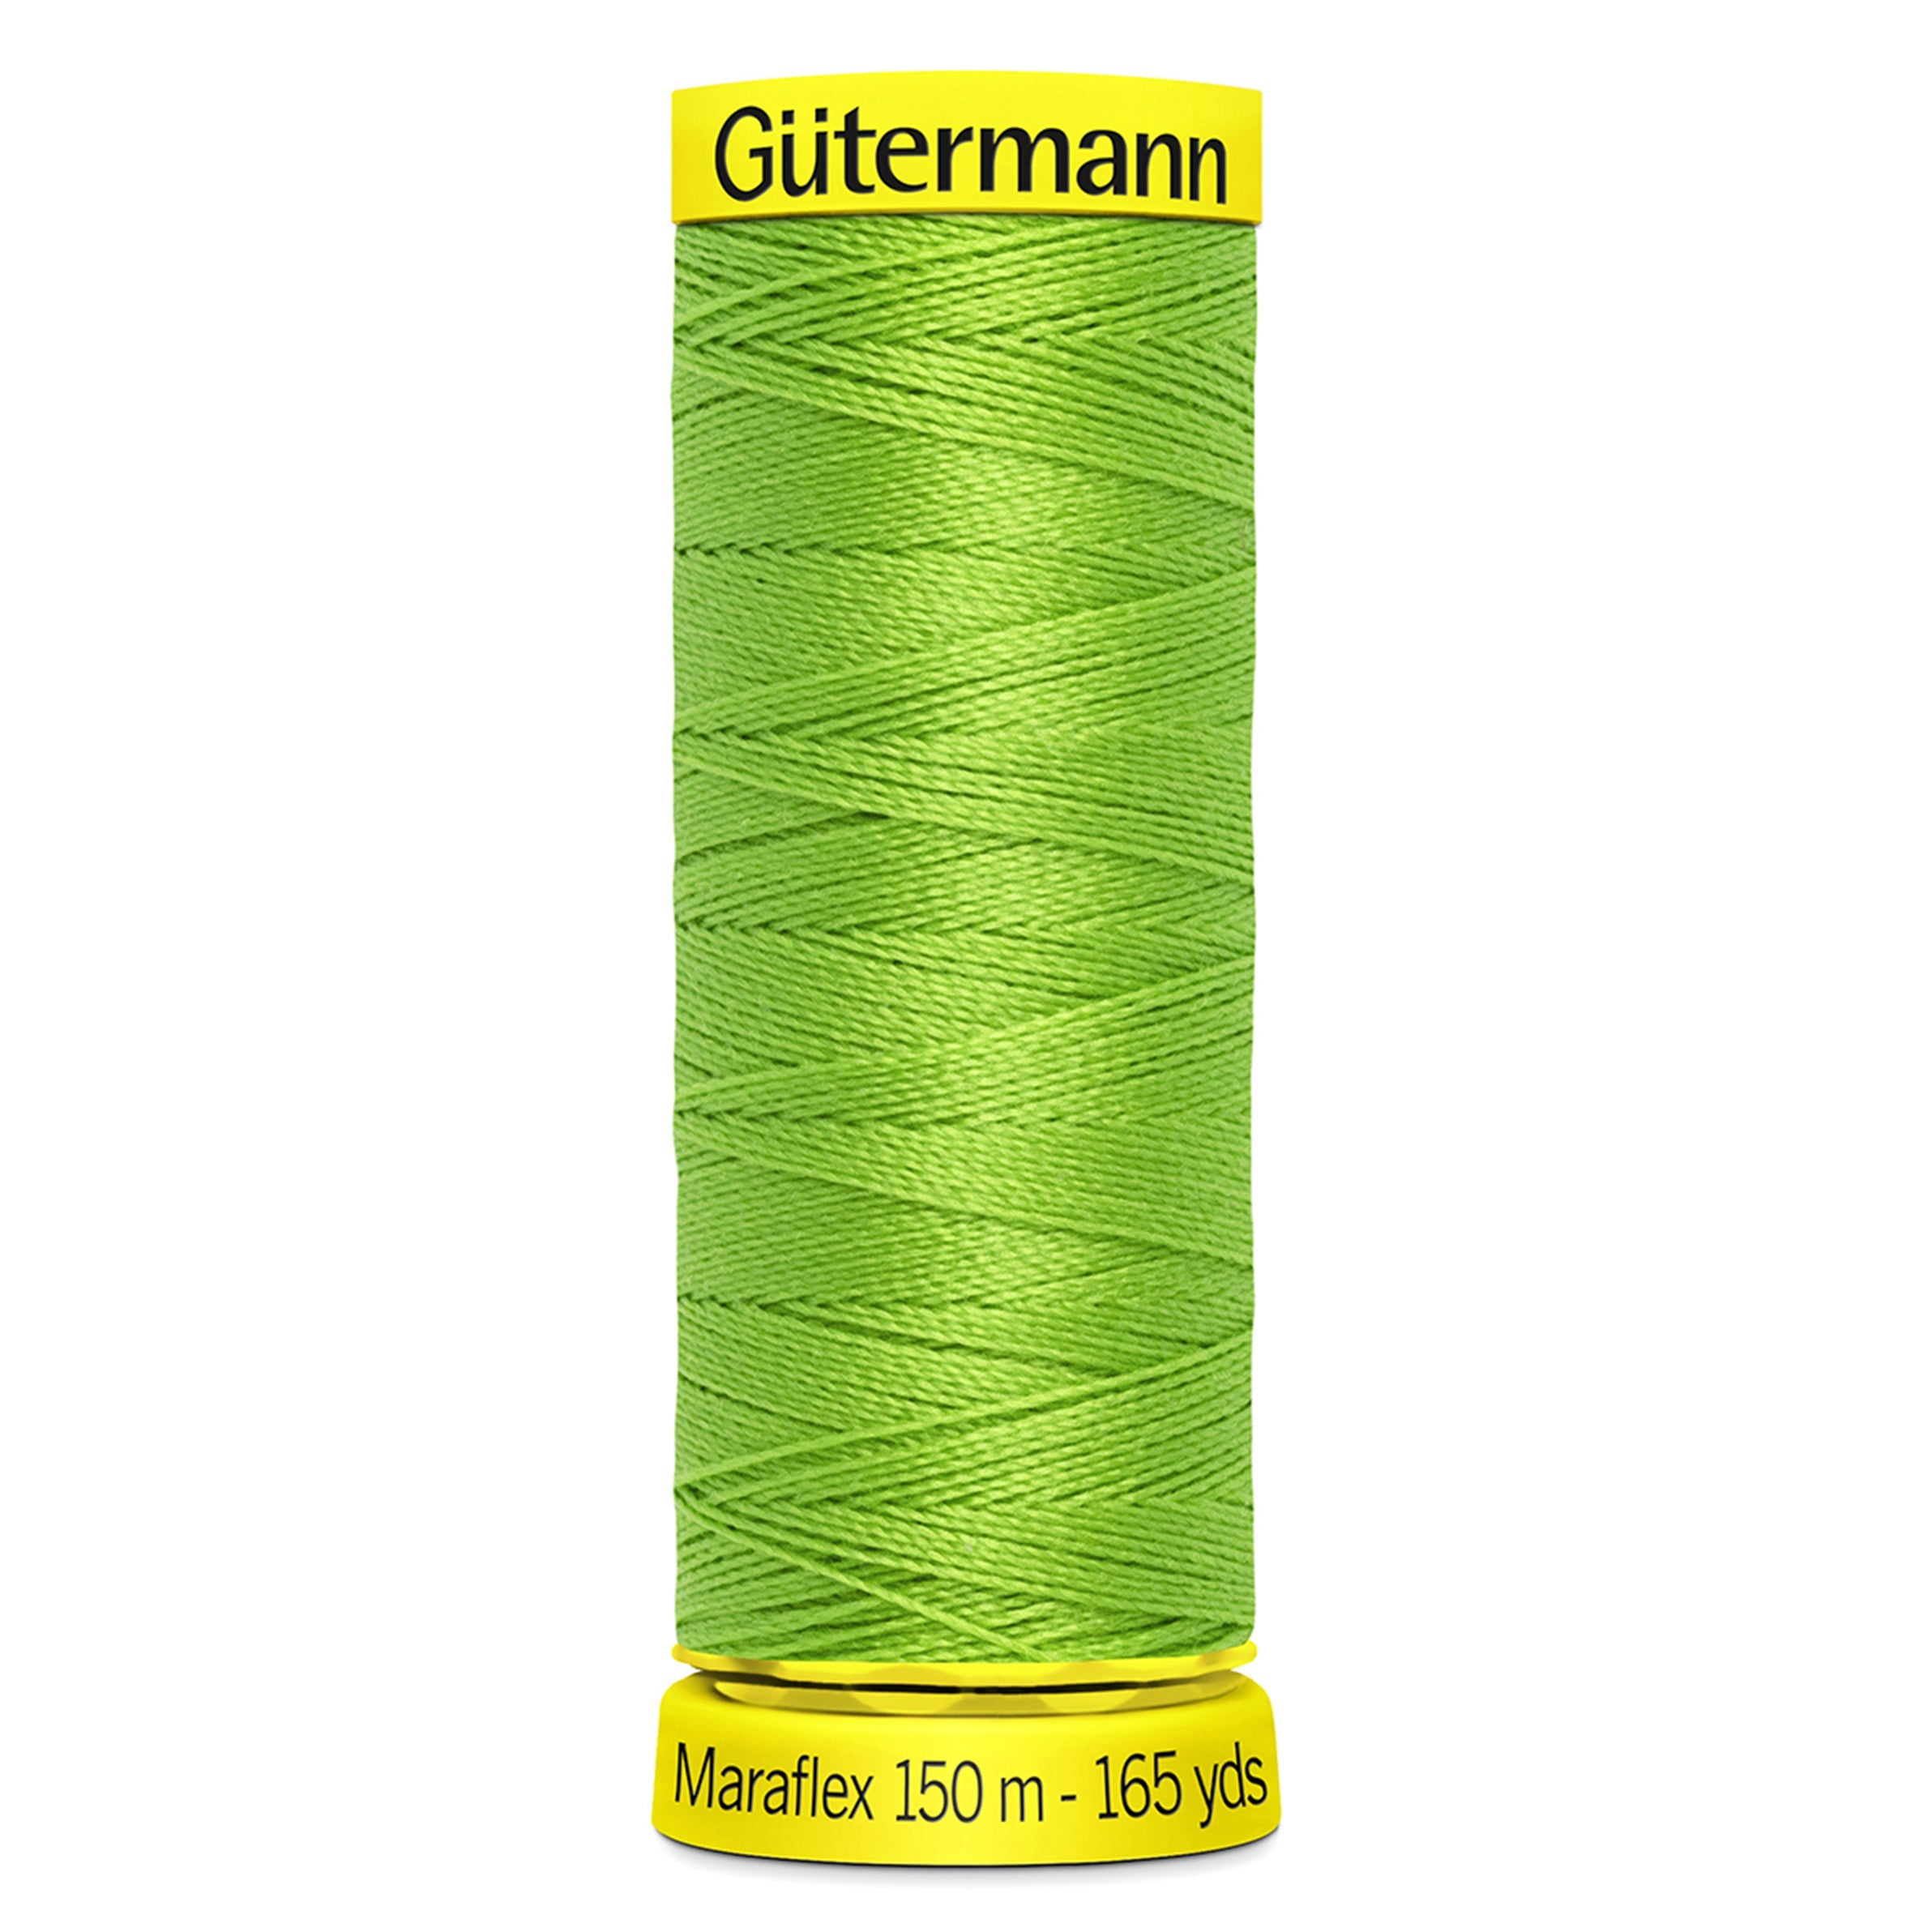 Gutermann Maraflex Stretchy Sewing Thread 150m colour 336 Chartreuse Green from Jaycotts Sewing Supplies